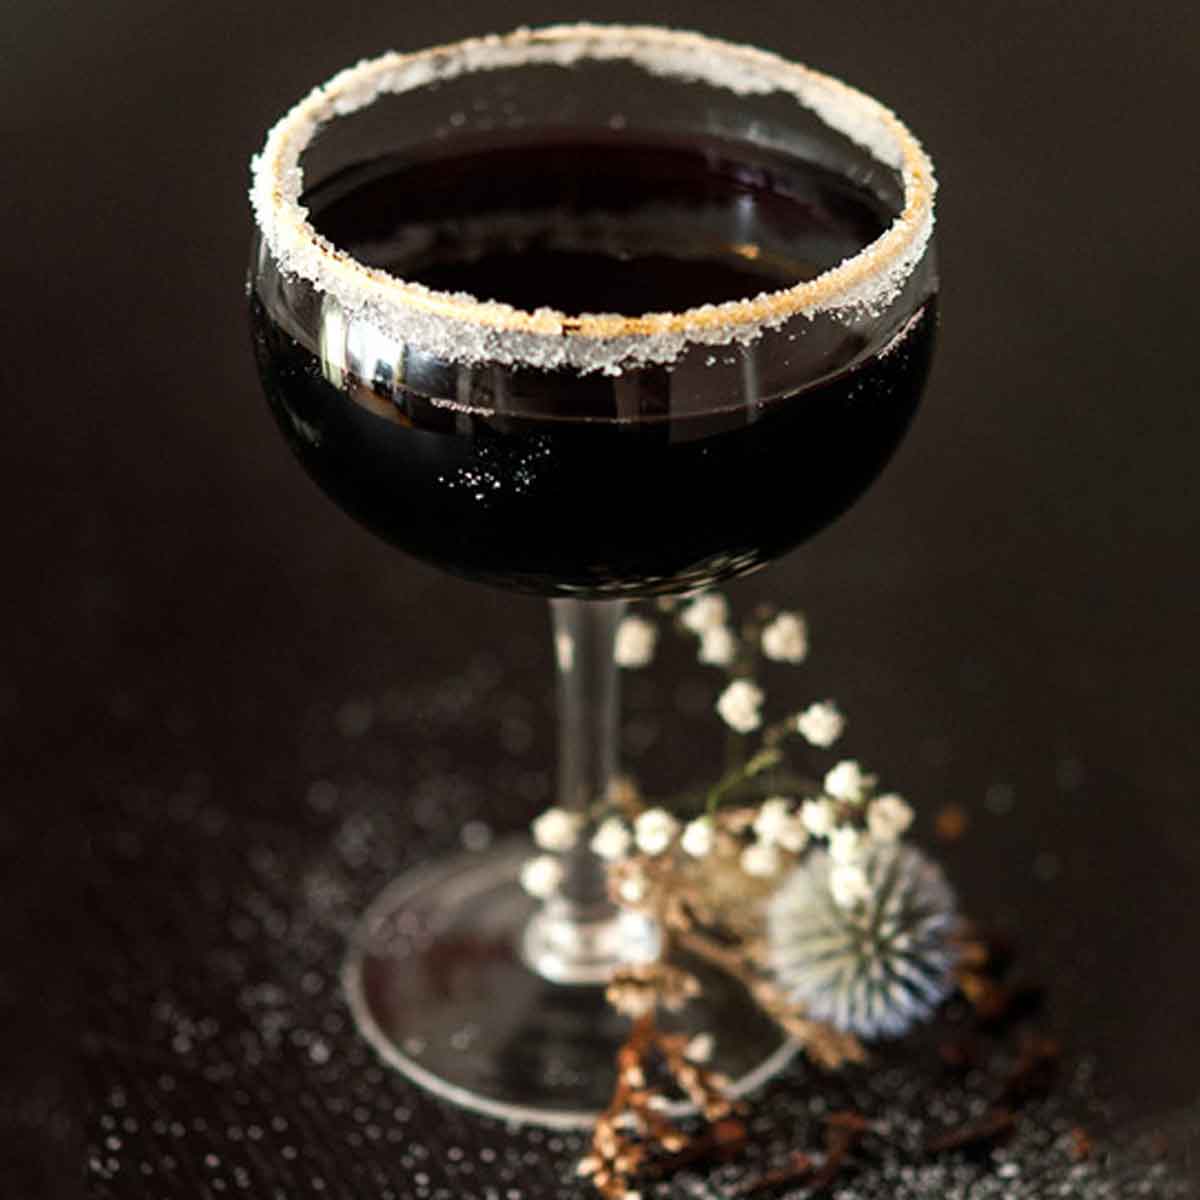 A sugar-rimmed, black cocktail surrounded by dry baby's breath on a sugar-sprinkled table.